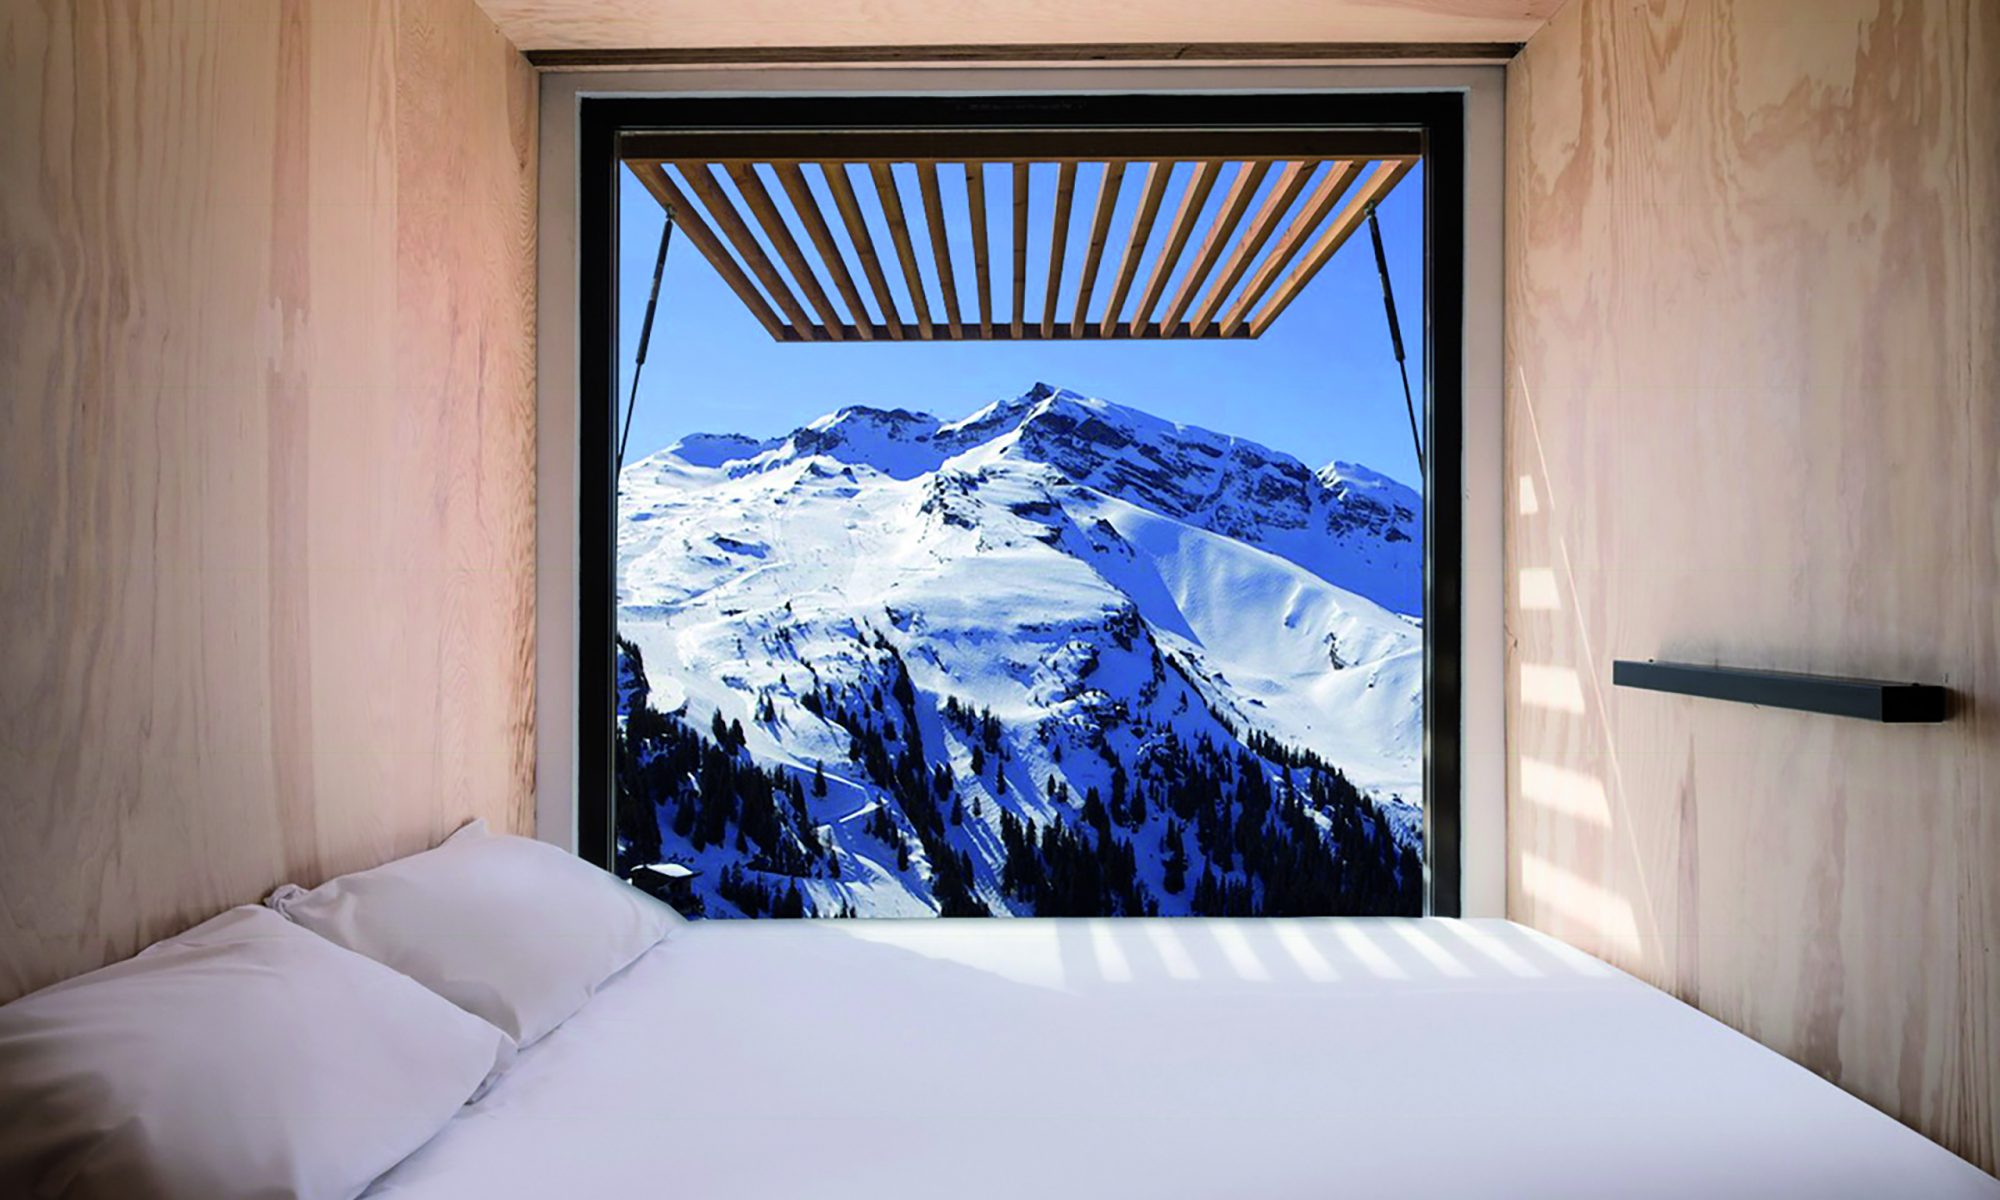 Flying Nest Montage in Avoriaz 1800. The “FLYING NEST” pop-up mobile accommodation concept is this season in Avoriaz 1800.